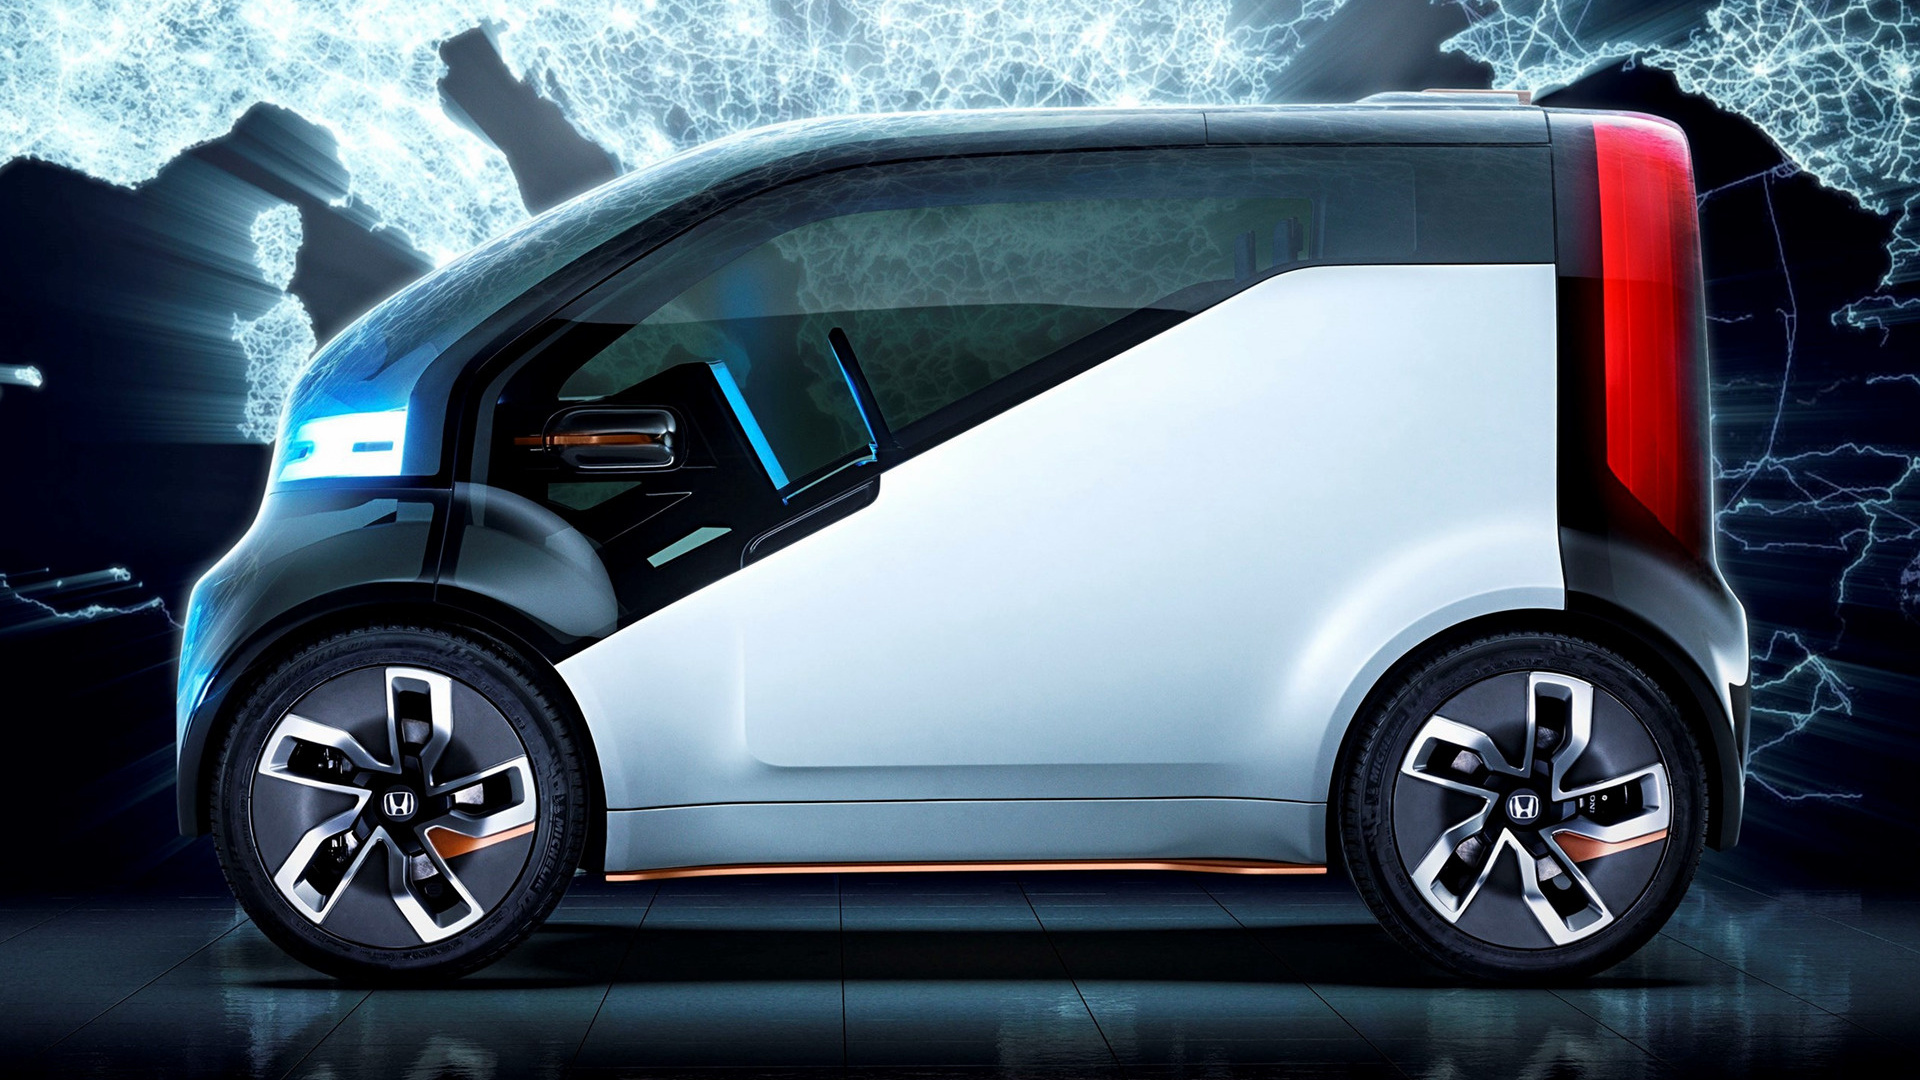 2017 Honda NeuV Concept - Wallpapers and HD Images | Car Pixel